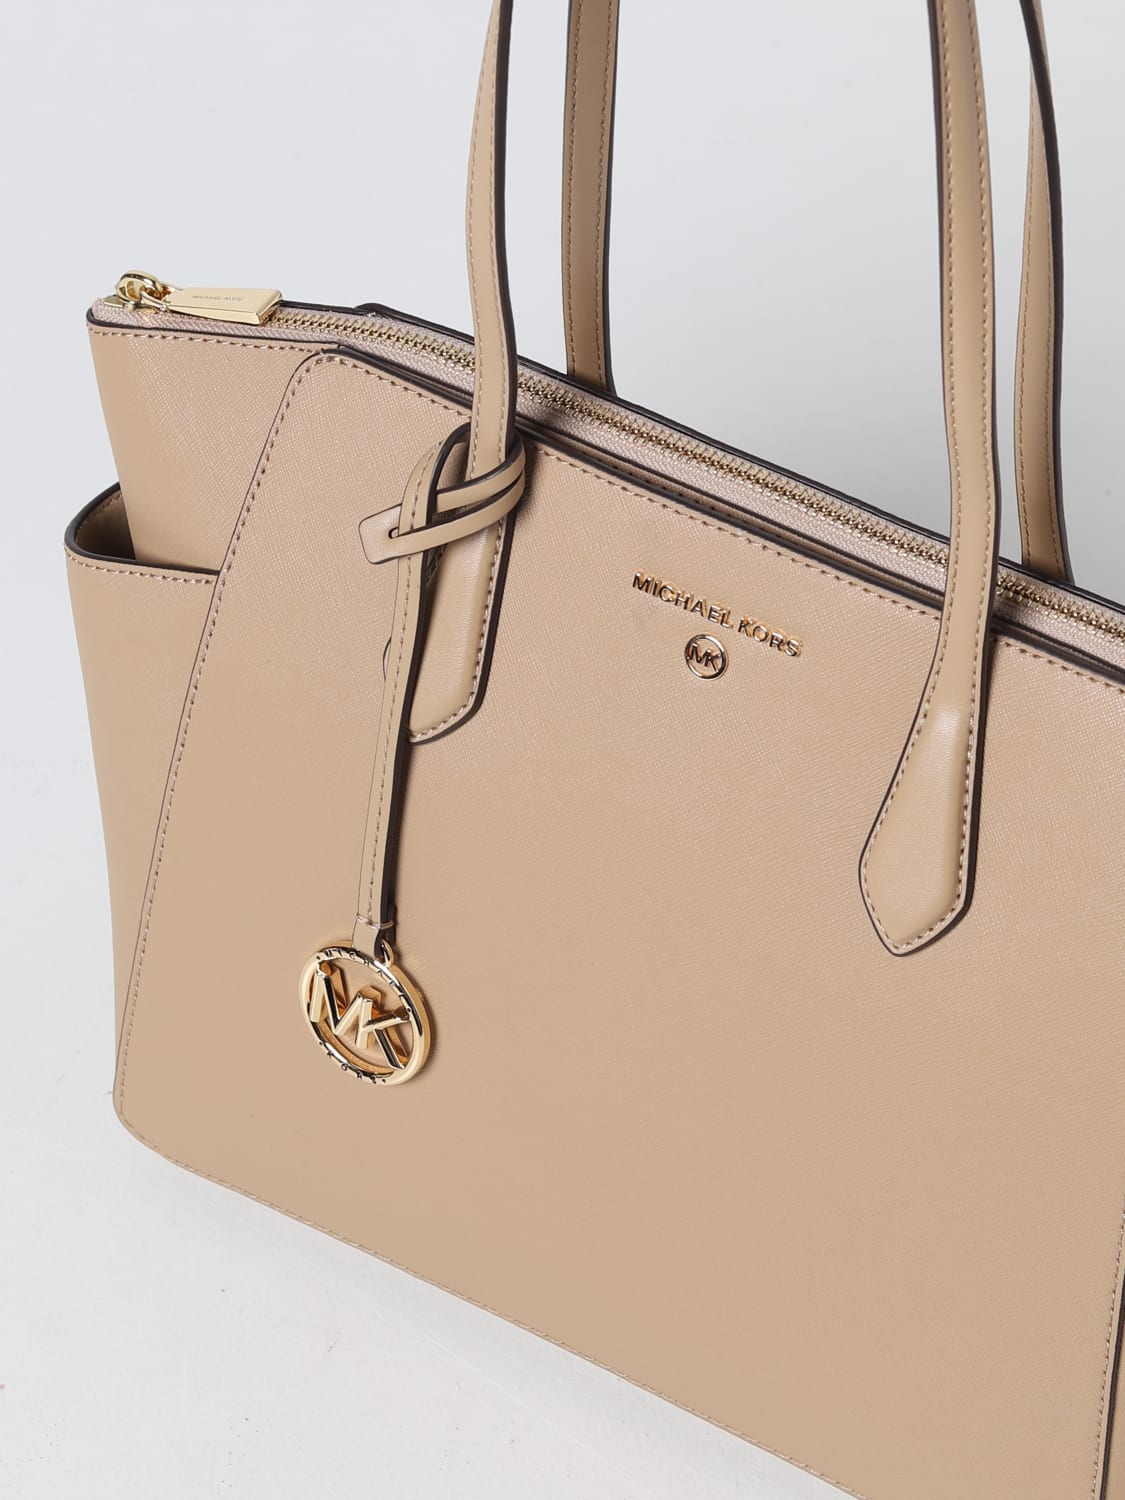 form Sow Mange MICHAEL KORS: Michael bag in saffiano leather - Camel | Michael Kors tote  bags 30S2G6AT2L online on GIGLIO.COM